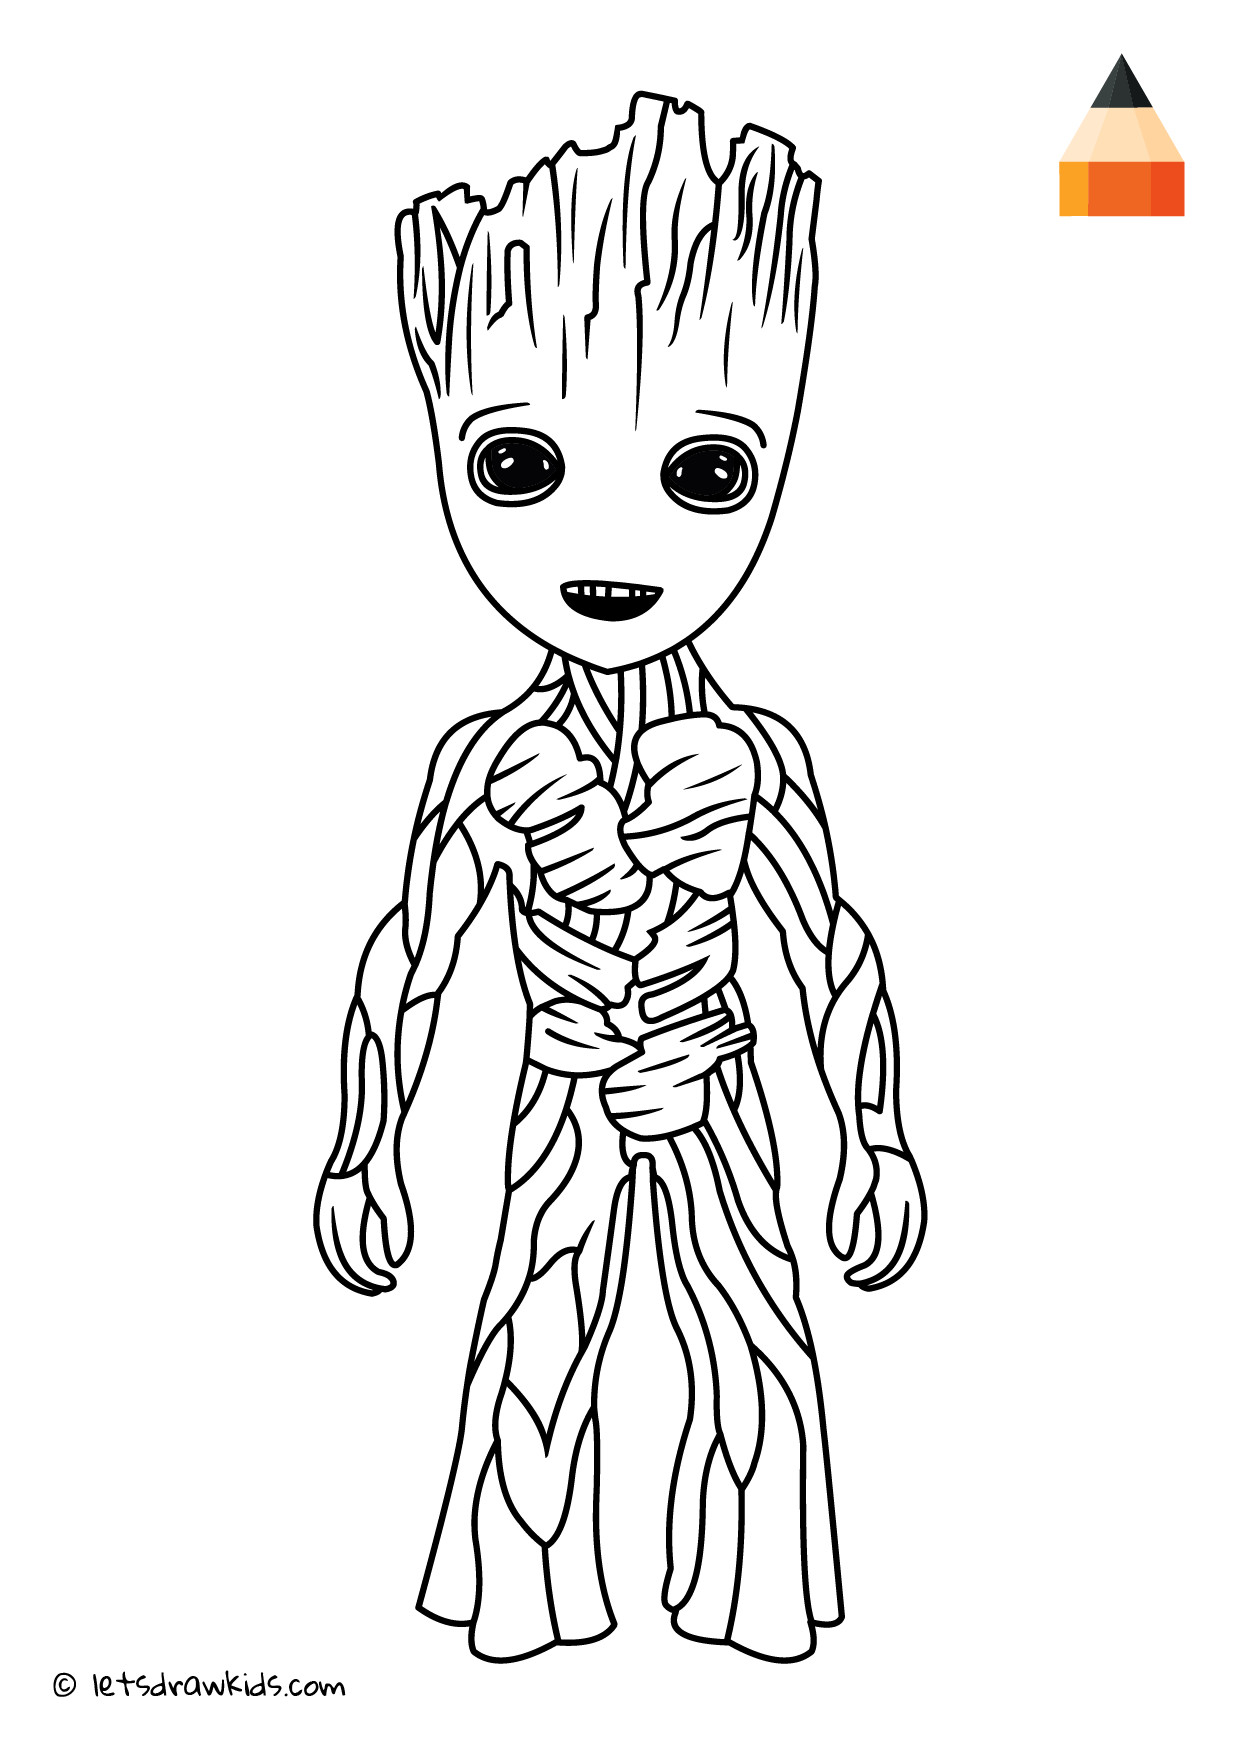 Baby Groot Coloring Page
 Coloring Page Teenager Groot